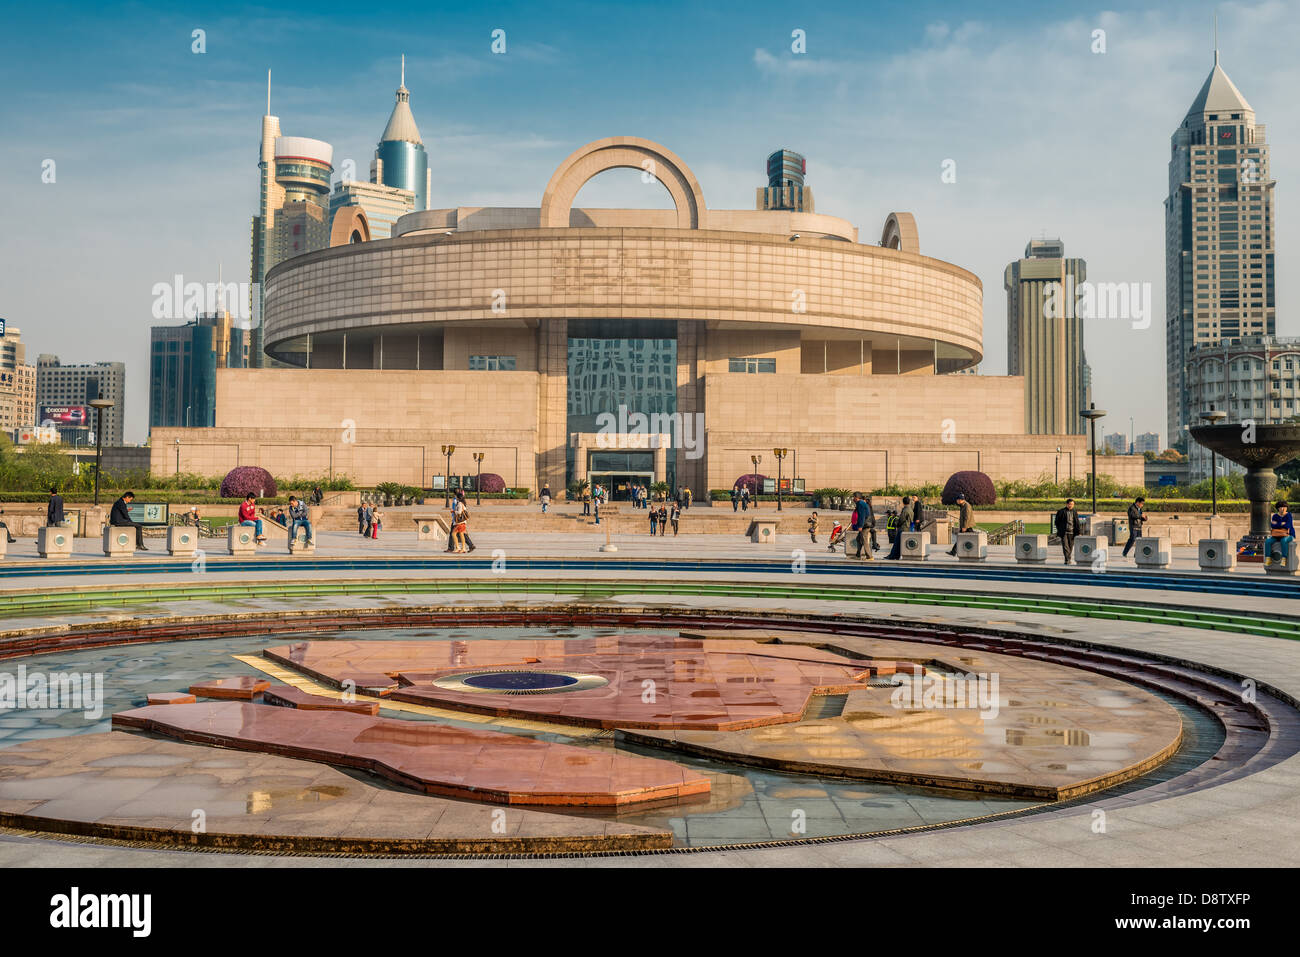 Shanghai, China - April 7, 2013: Shanghai museum on people square at the city of Shanghai in China on april 7th, 2013 Stock Photo